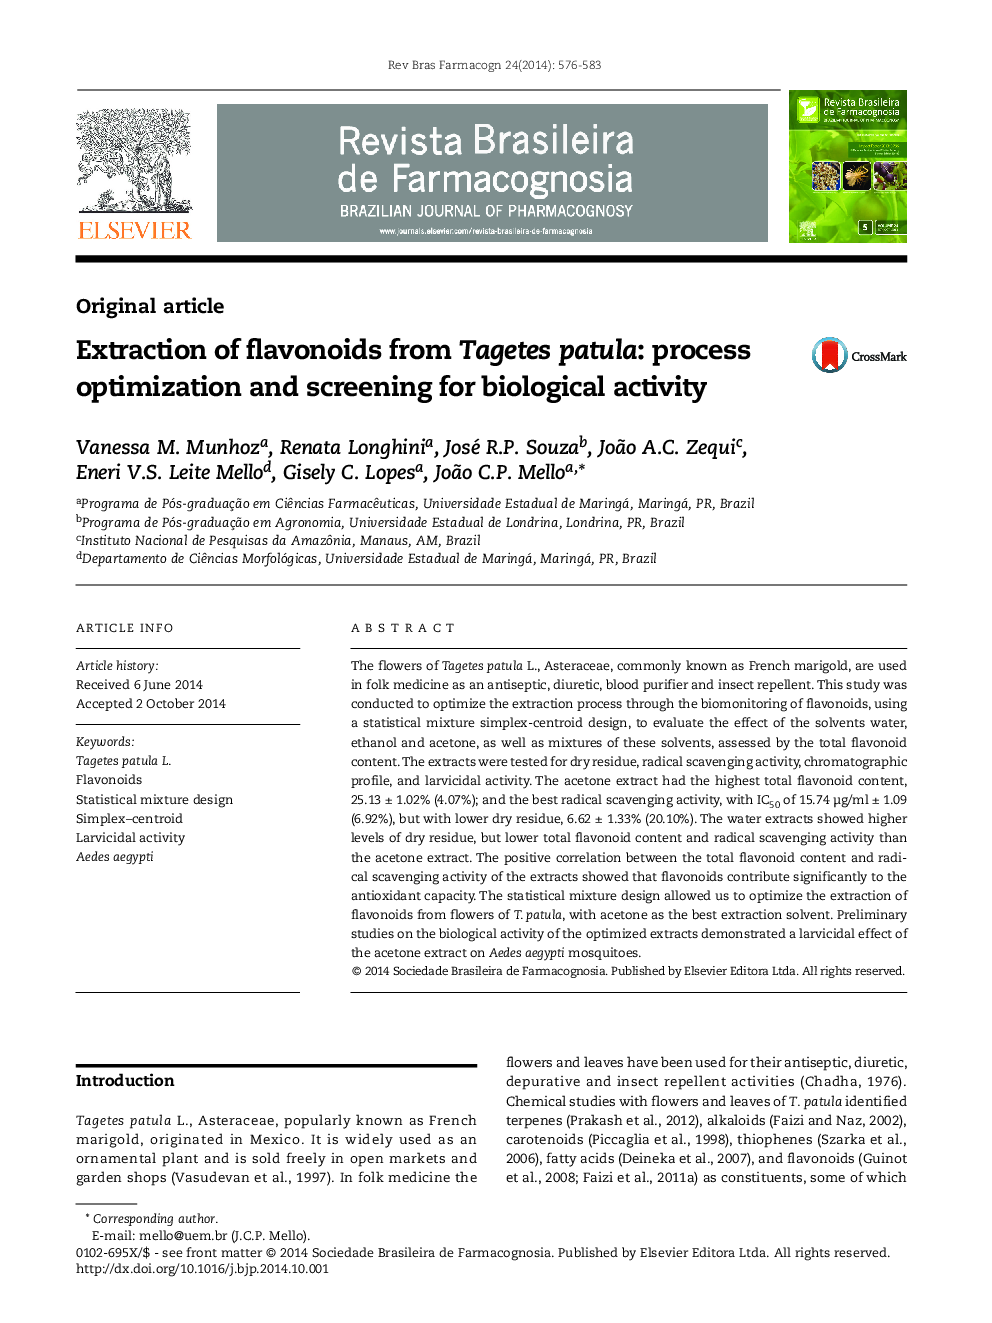 Extraction of flavonoids from Tagetes patula: process optimization and screening for biological activity